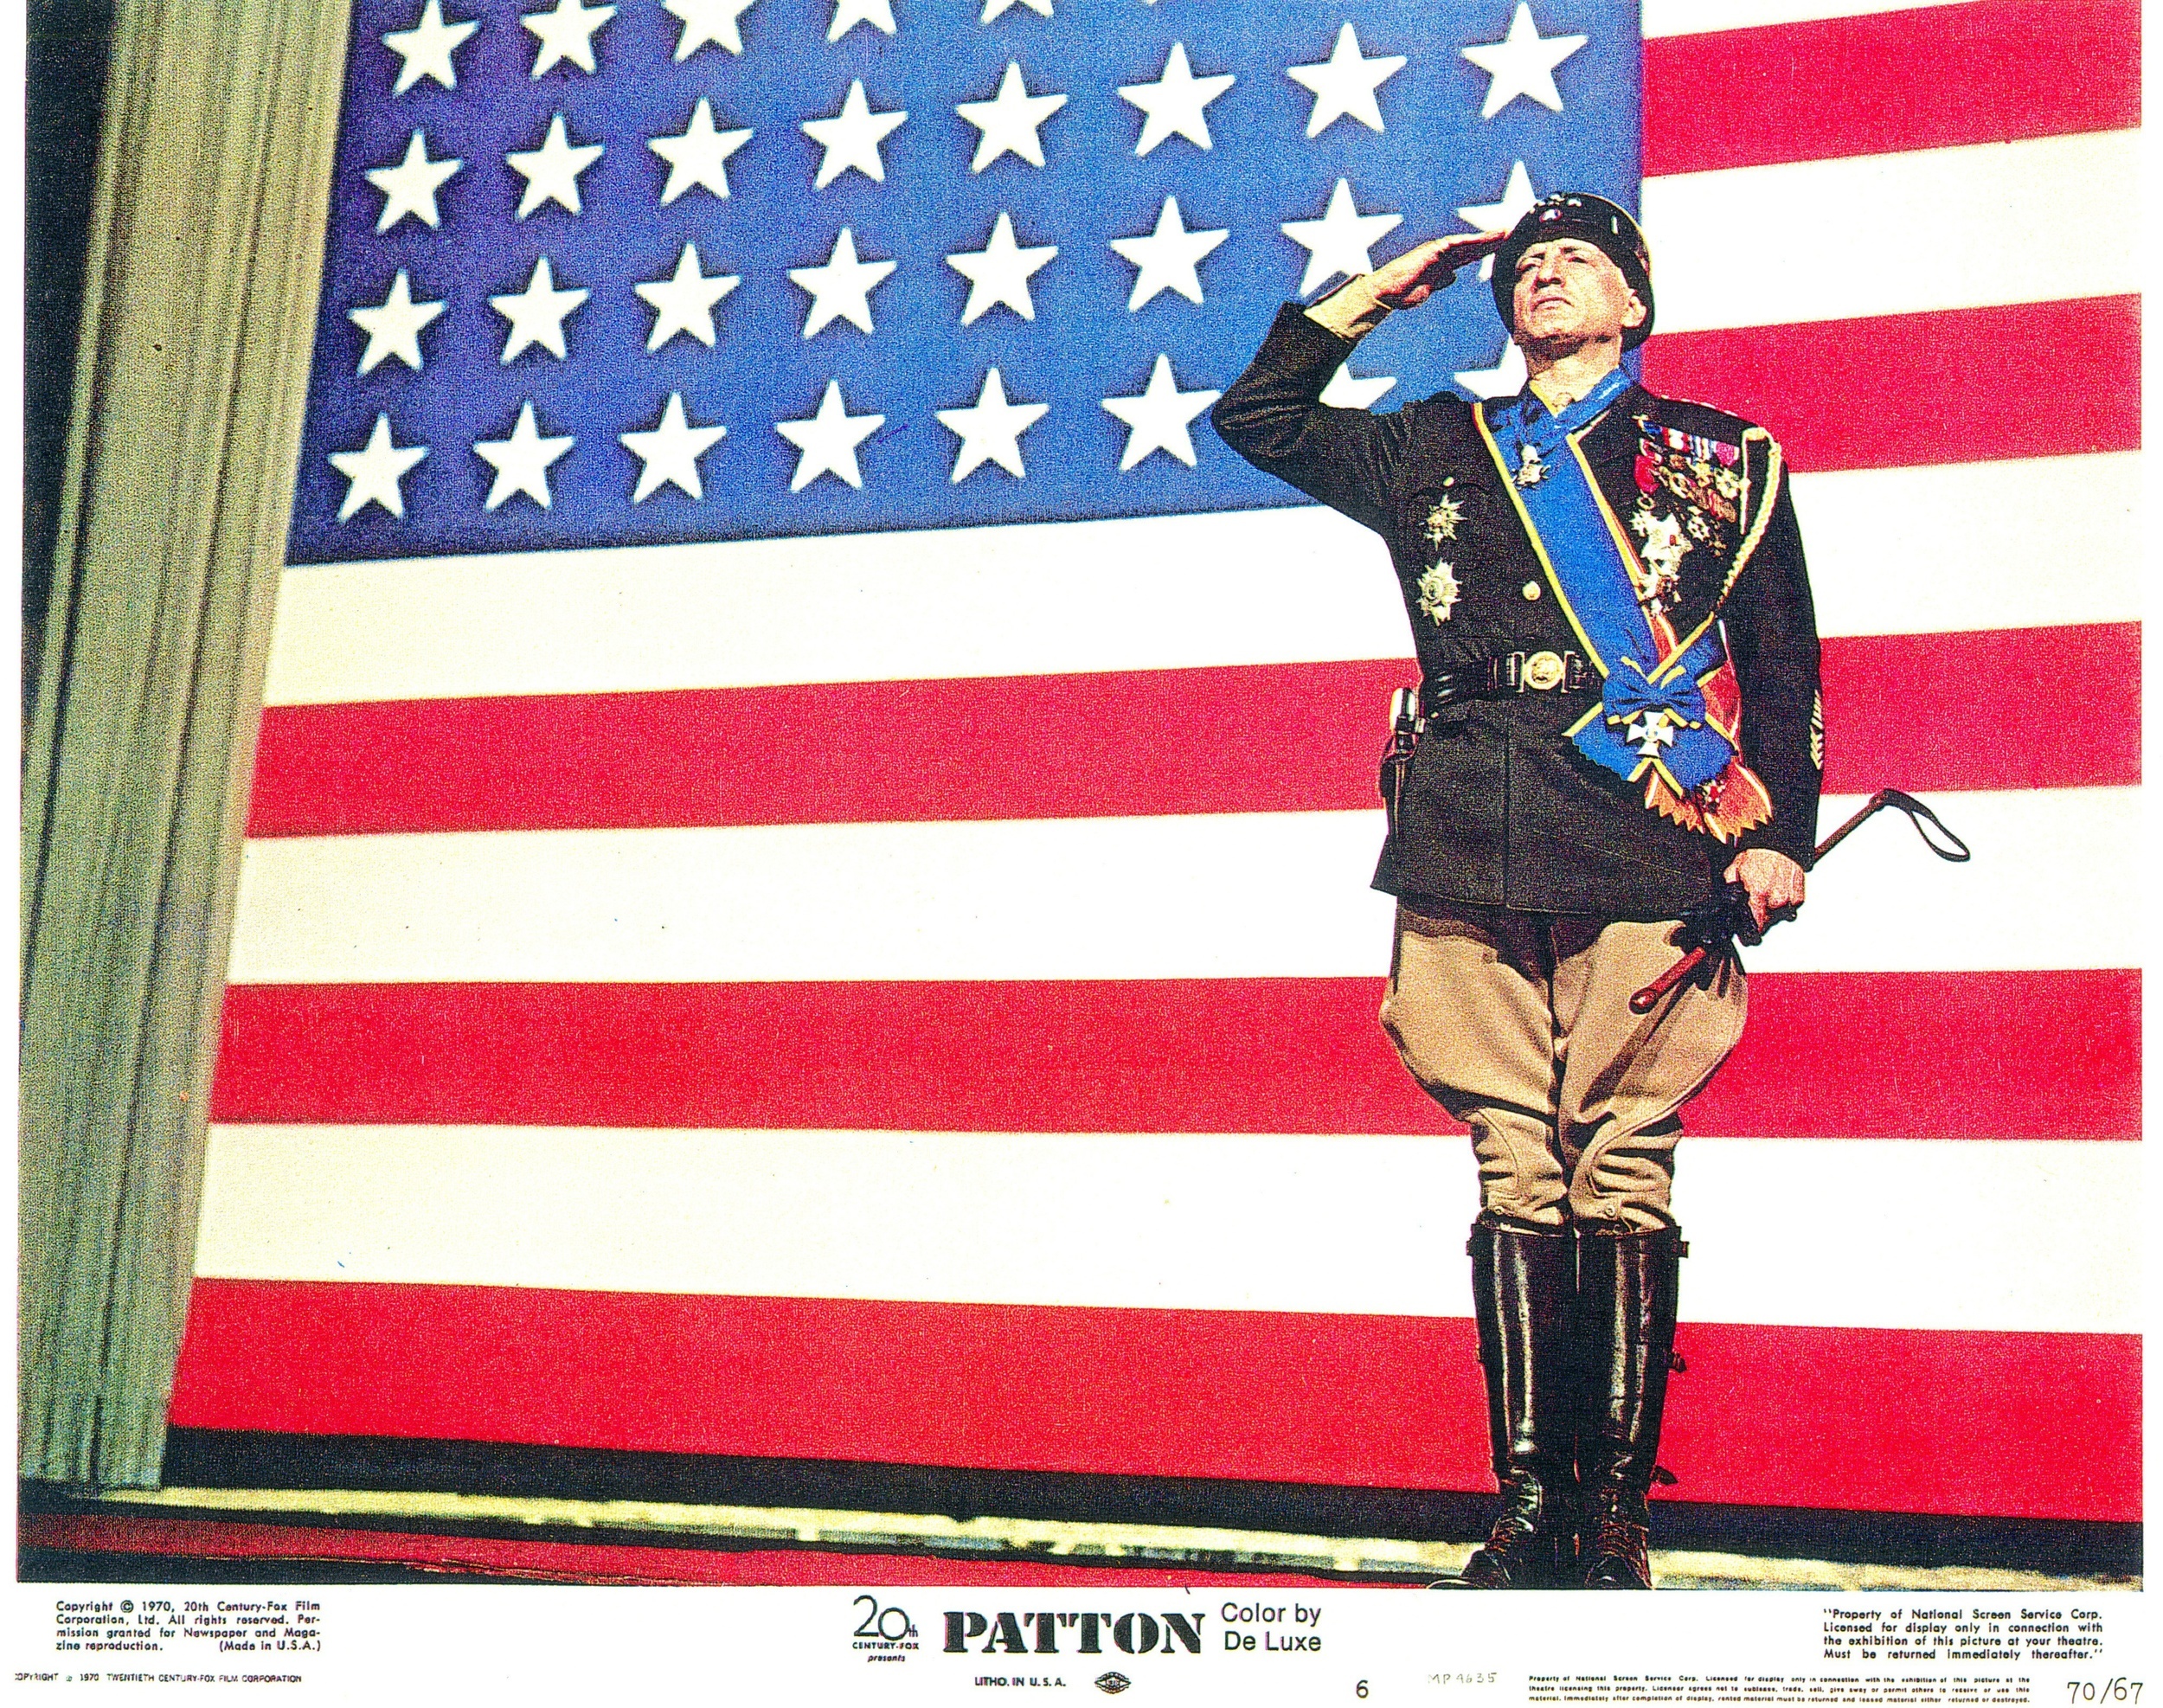 <p>George C. Scott may have refused his Oscar for <em>Patton</em>, which also won Best Picture, but you can understand why he won it. The film opens with a famed monologue in front of a giant American flag. That monologue is full of significant lines, beginning with Patton addressing his troops by declaring, “Now I want you to remember that no bastärd ever won a war by dying for his country. He won it by making the other poor dumb bastärd die for his country.”</p><p>You may also like: <a href='https://www.yardbarker.com/entertainment/articles/the_25_most_memorable_fictional_companies_firms_or_stores_120623/s1__34503920'>The 25 most memorable fictional companies, firms or stores</a></p>